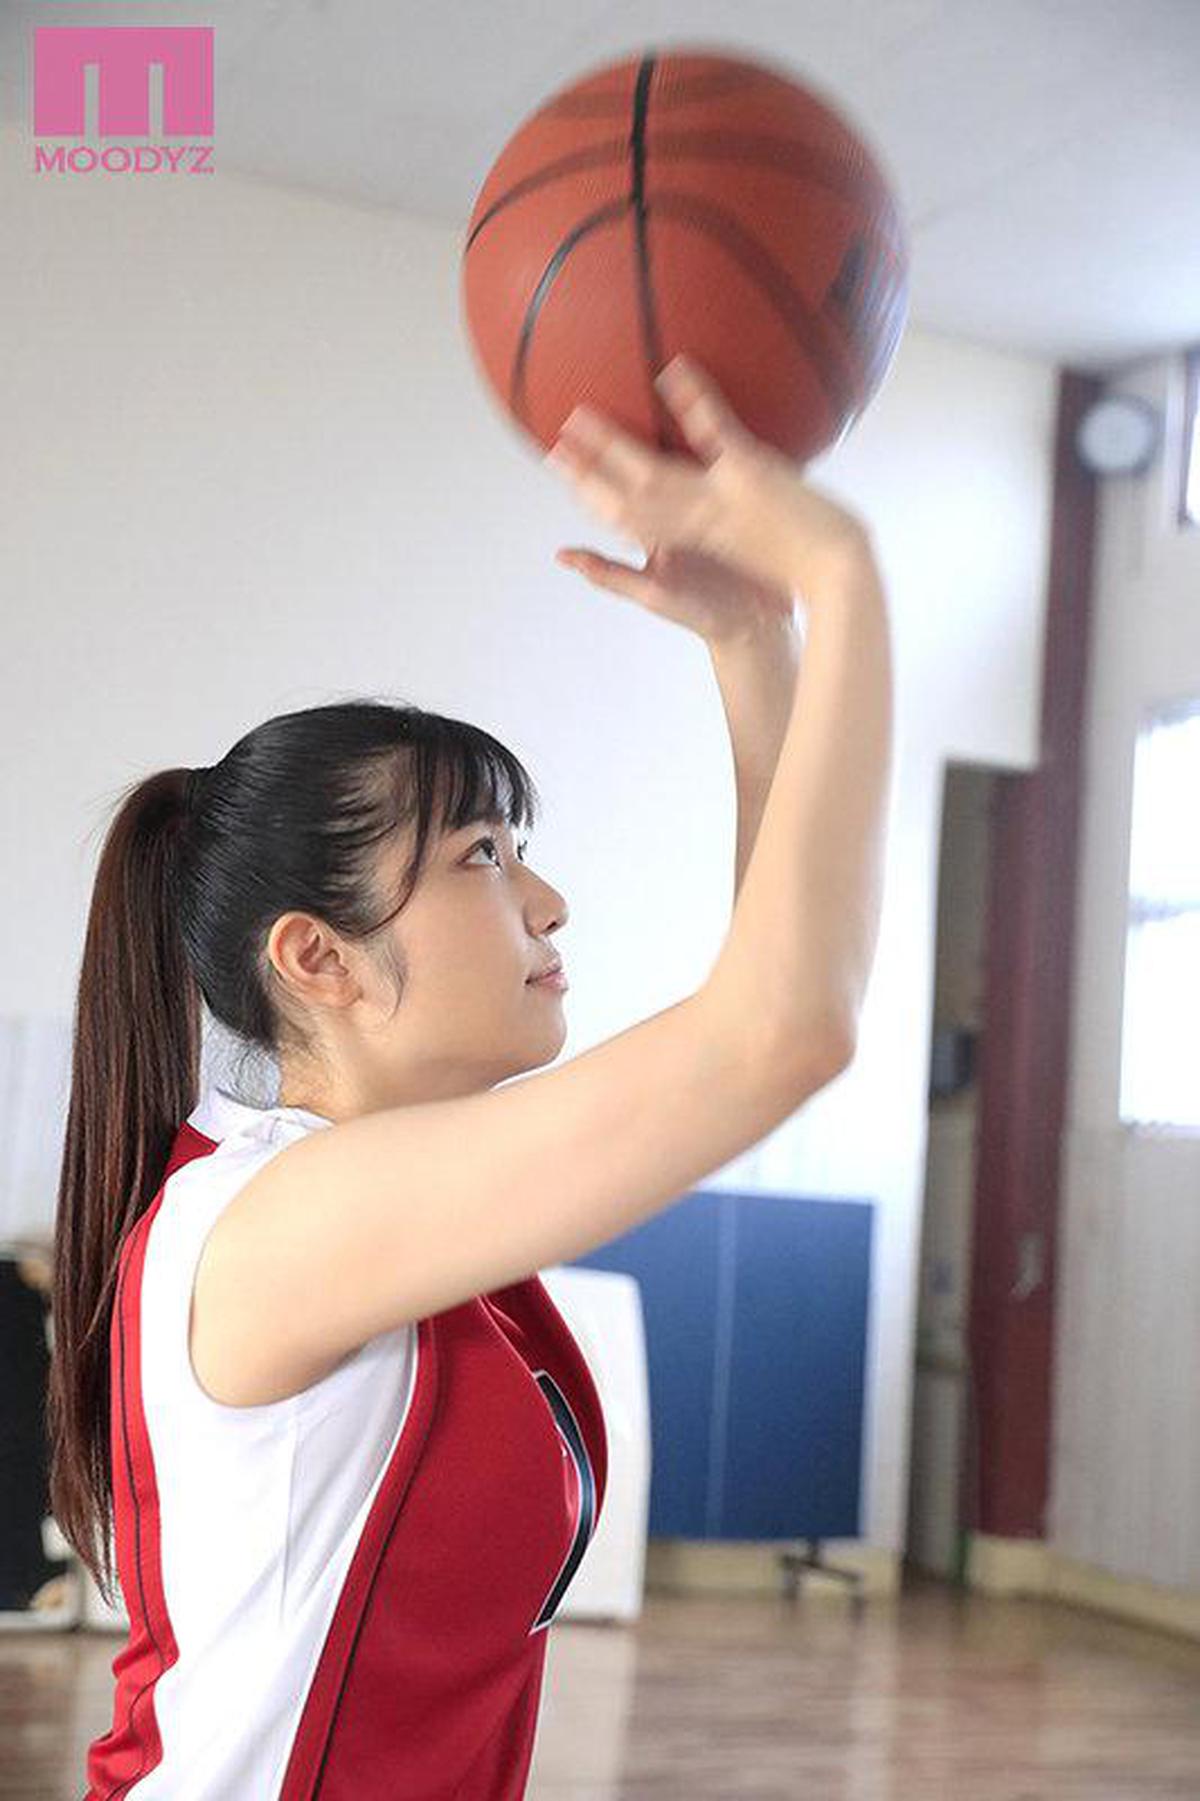 MIFD-194 Rookie Basketball Former Under-Strengthening Player No.1 Three-Point Shooter Full-powered AV Debut with Experience of Taking the No. 1 All-Around in Japan! !! Ruka Nanamura